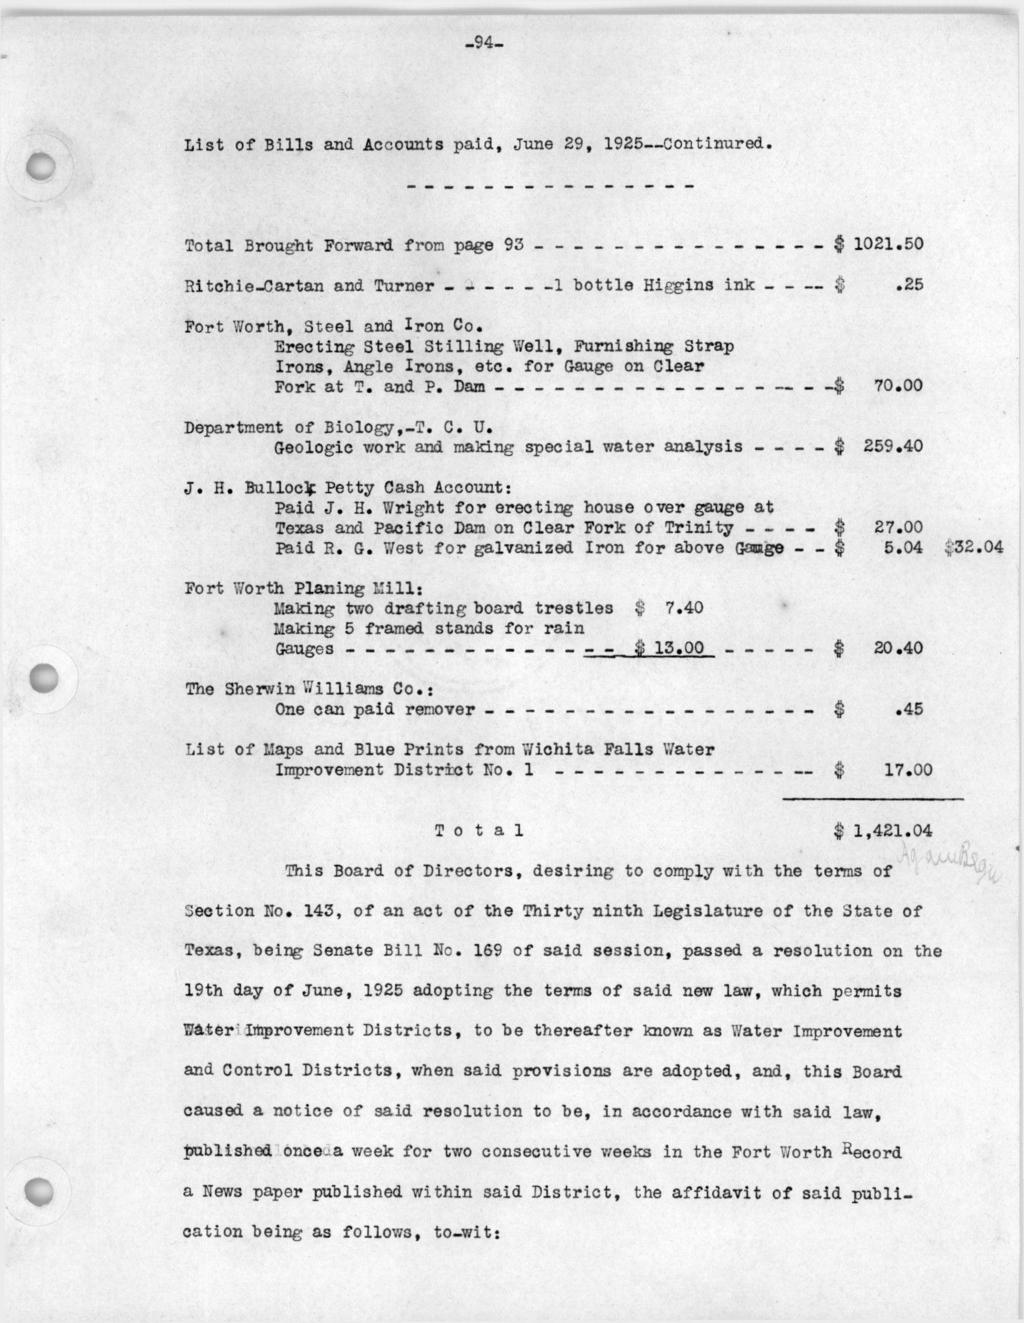 -94- List of Bills and Accounts paid, June 29, 1925 Continured. Total Brought Forward from page 93 $ 1021.50 Ritchie-Car tan and Turner 1 bottle Higgins ink $.25 Fort Worth, Steel and Iron Co.